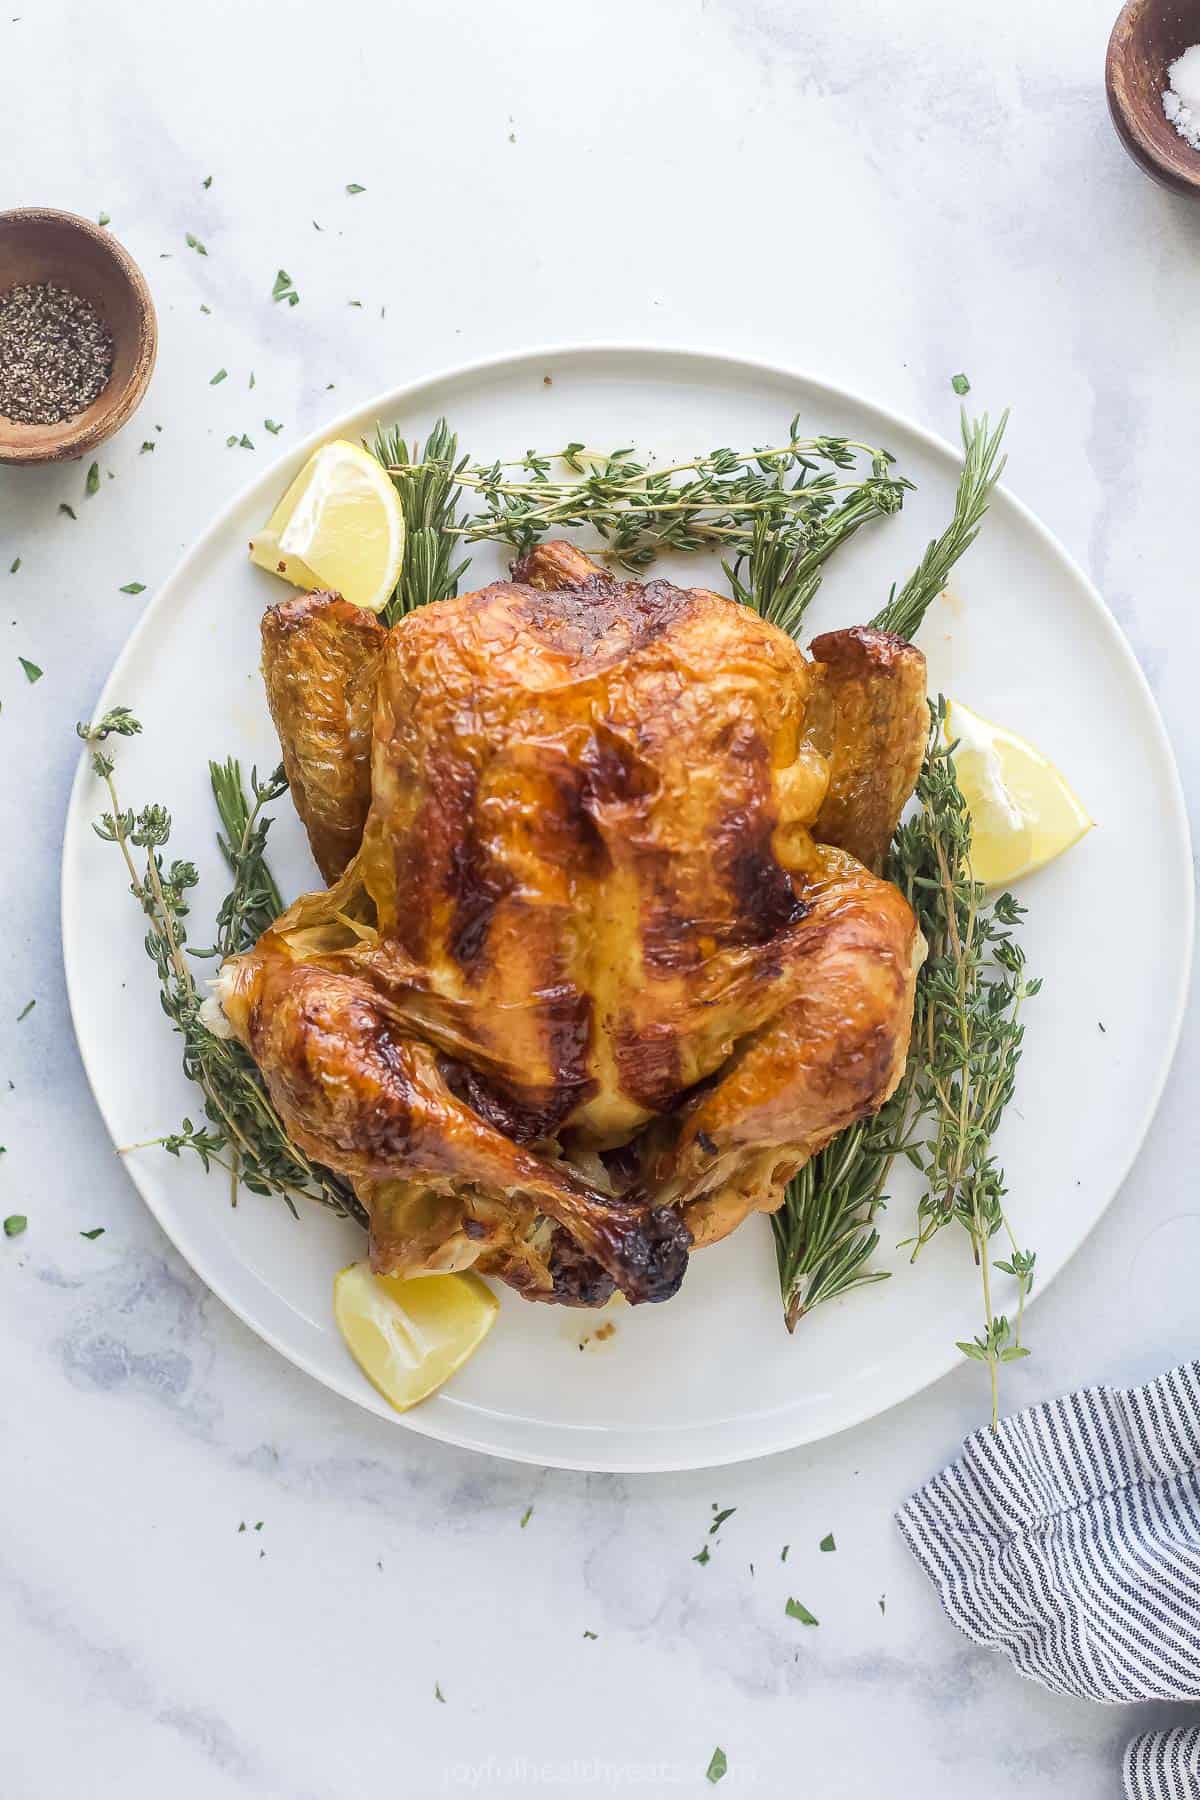 a roasted whole chicken on a platter with fresh herbs and lemon wedges